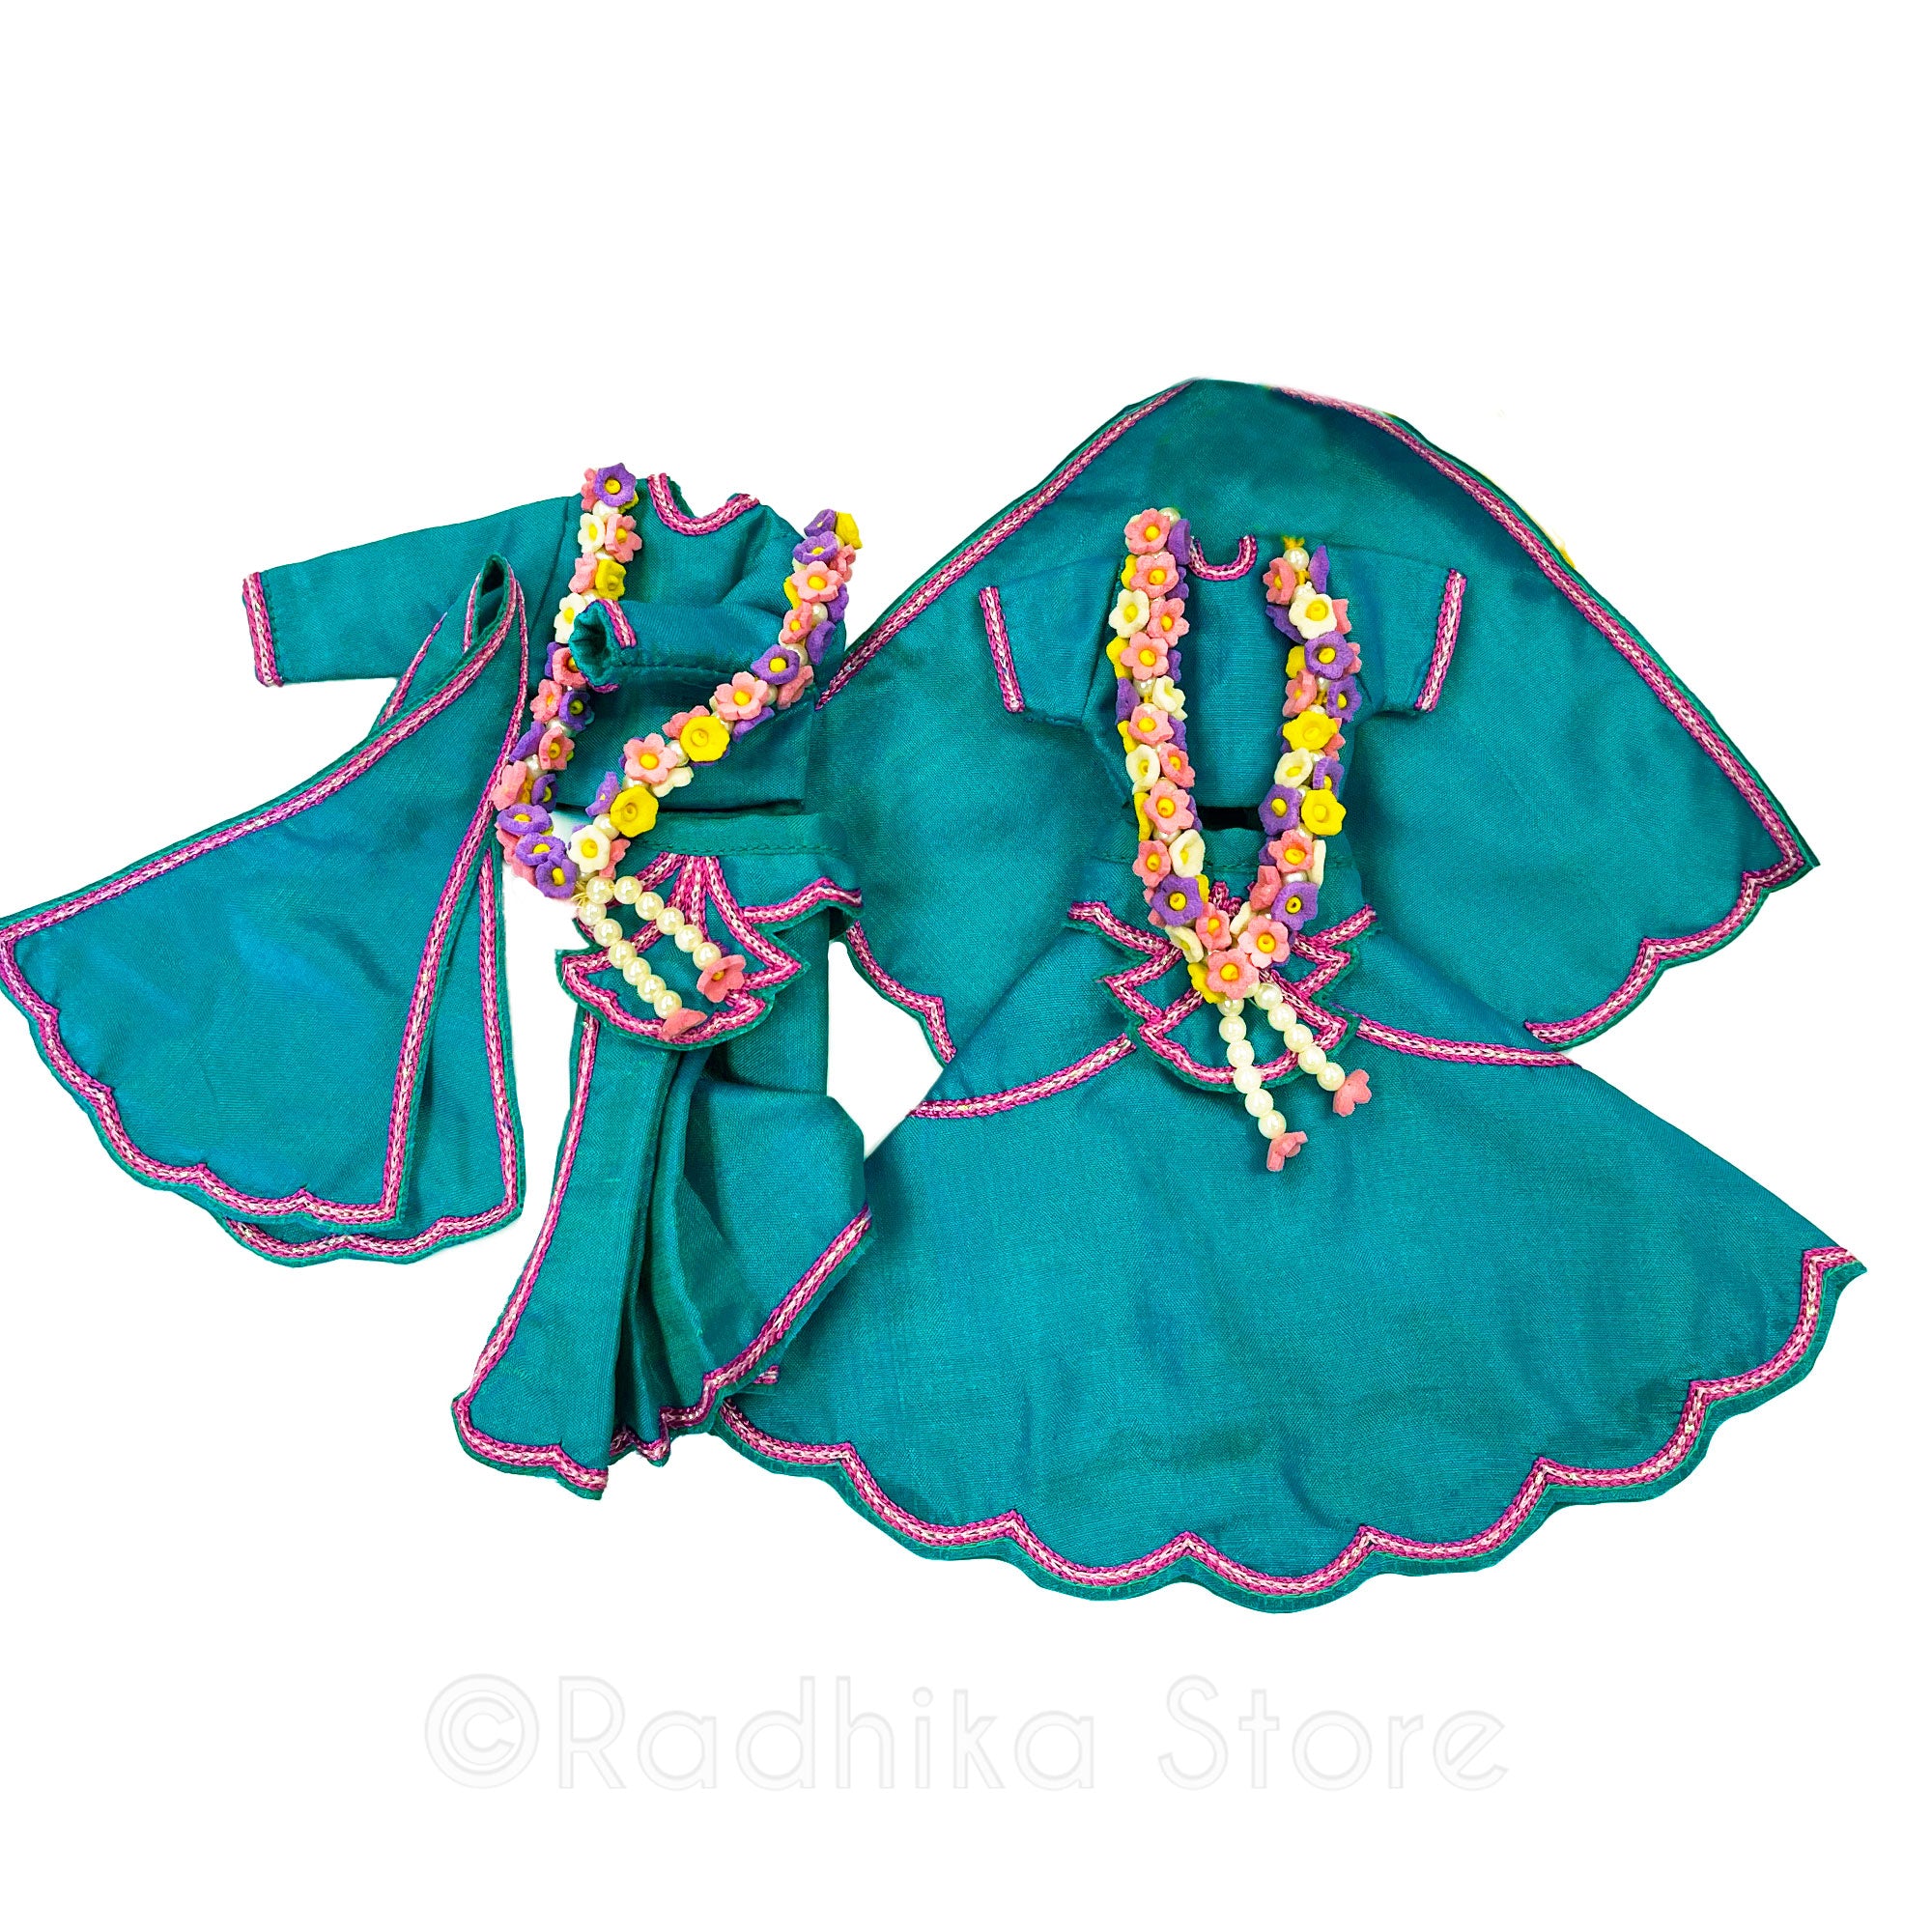 Oceans Of Mercy- Silk -  Deep Teal Blue and Pink - Radha Krishna Deity Outfit